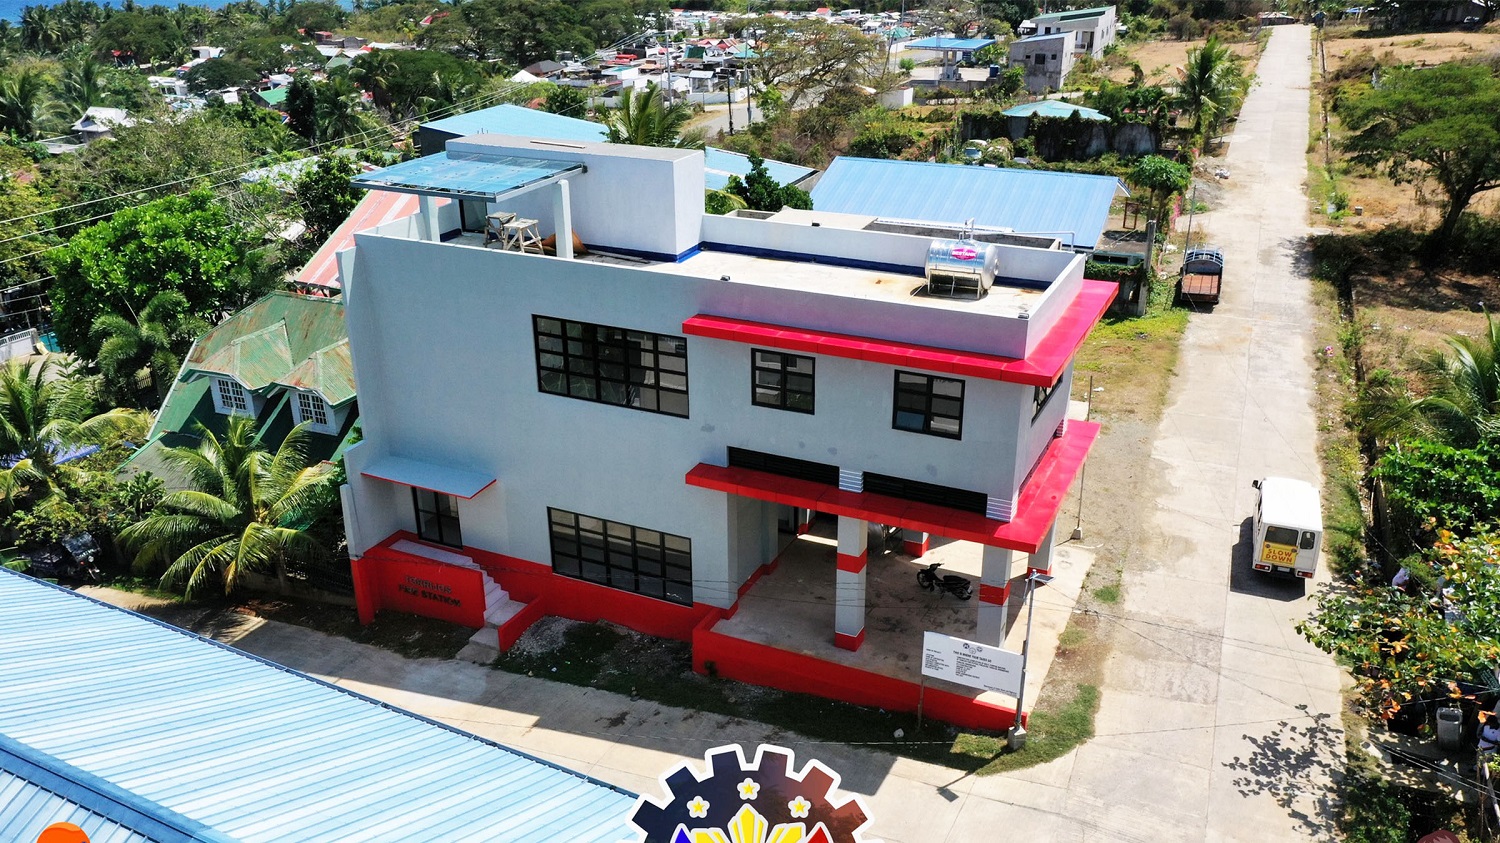 DPWH completes construction of Torrijos Fire Station